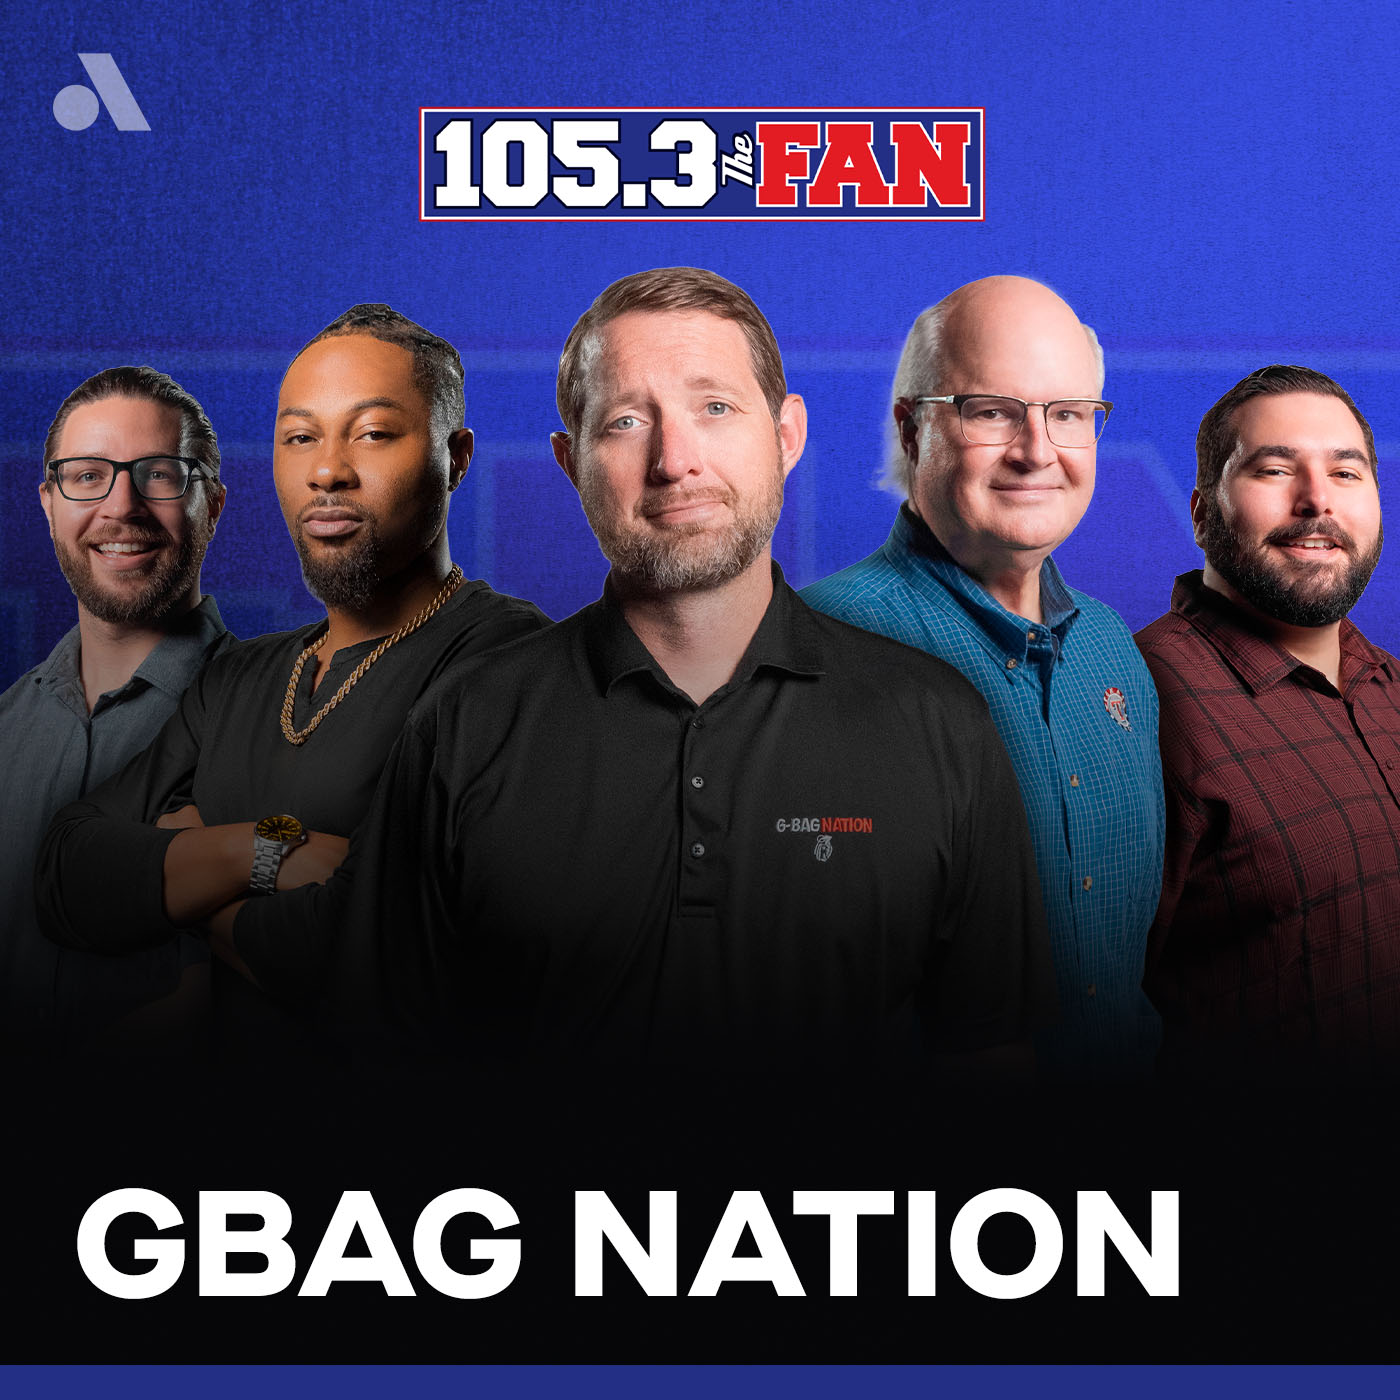 Rangers Insider Jared Sandler joins the G-Bag Nation to preview Rangers vs Seattle Mariners